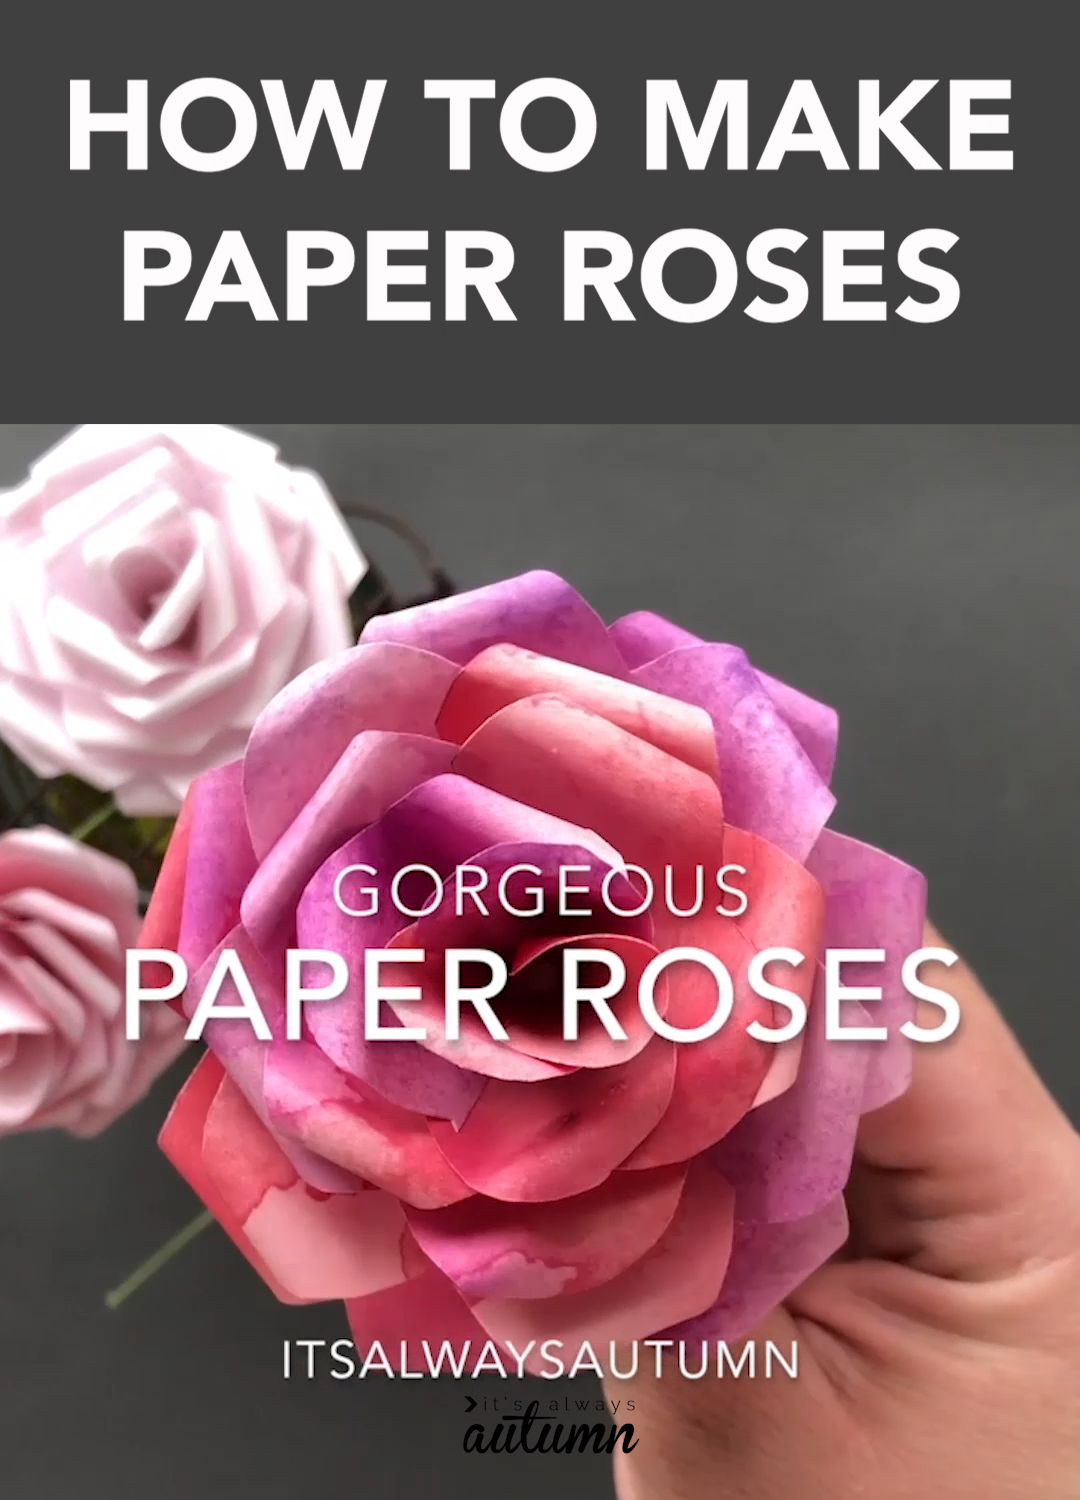 Make gorgeous paper roses with this free paper rose template -   20 diy projects Videos paper
 ideas